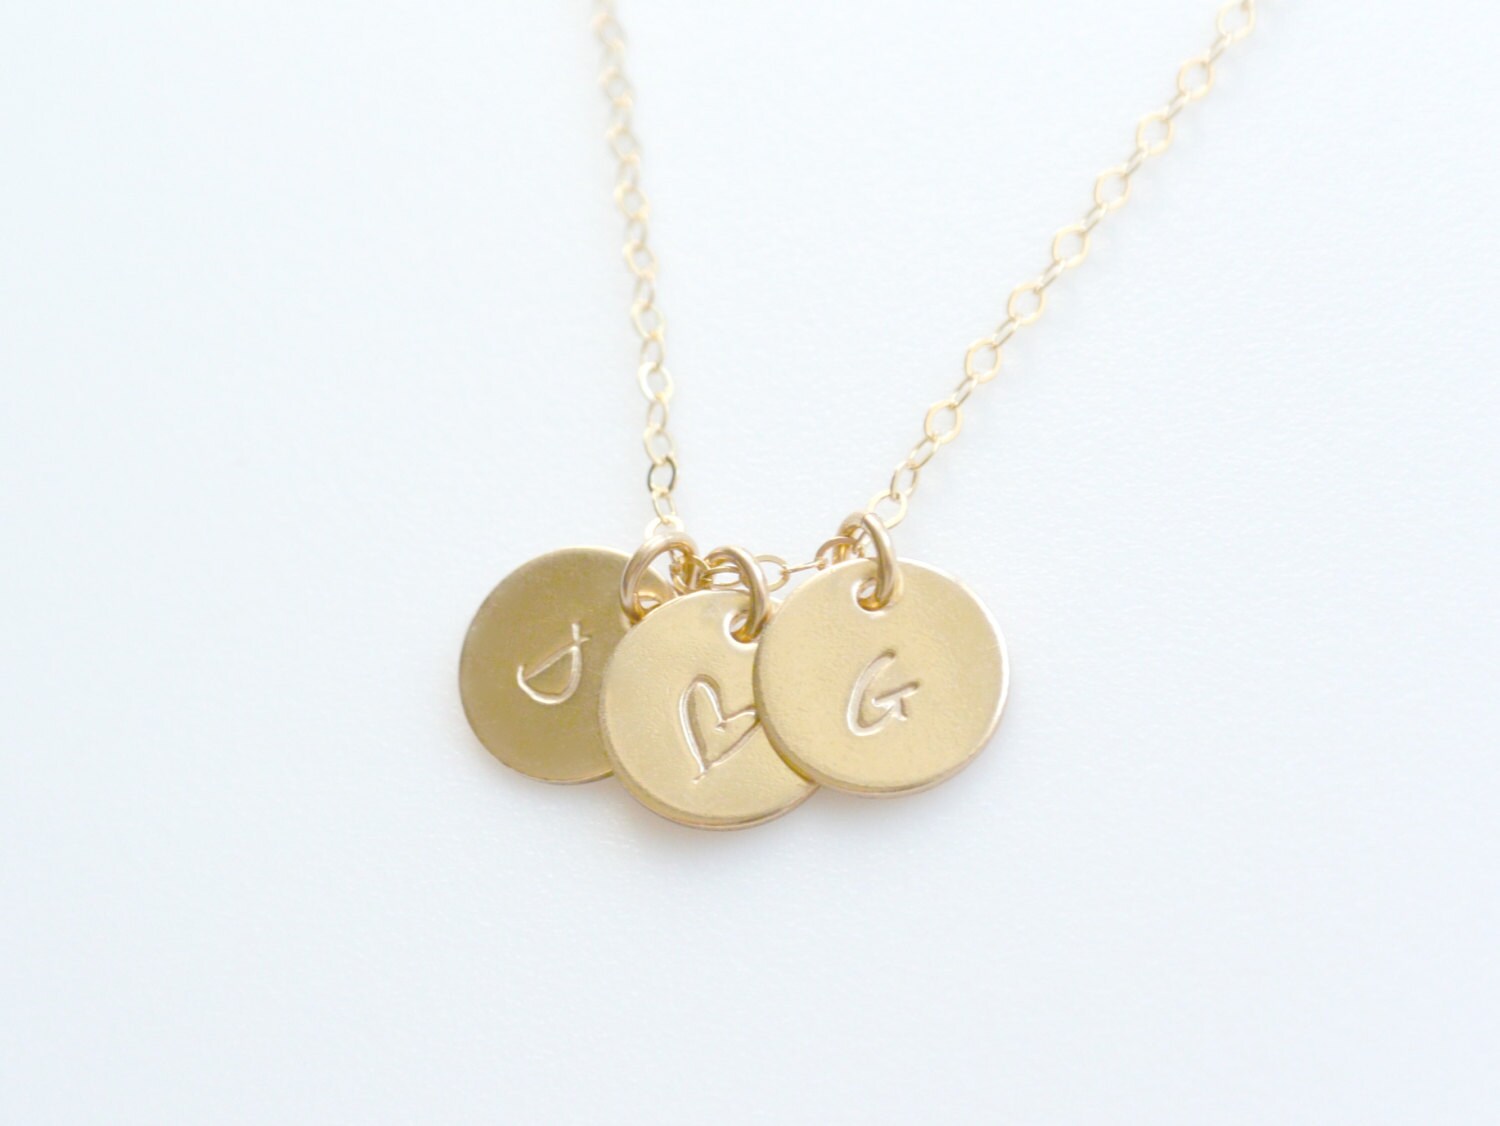 Personalized Initial Disc Necklace 1 2 3 4 5 6 7 8 Initial - Etsy